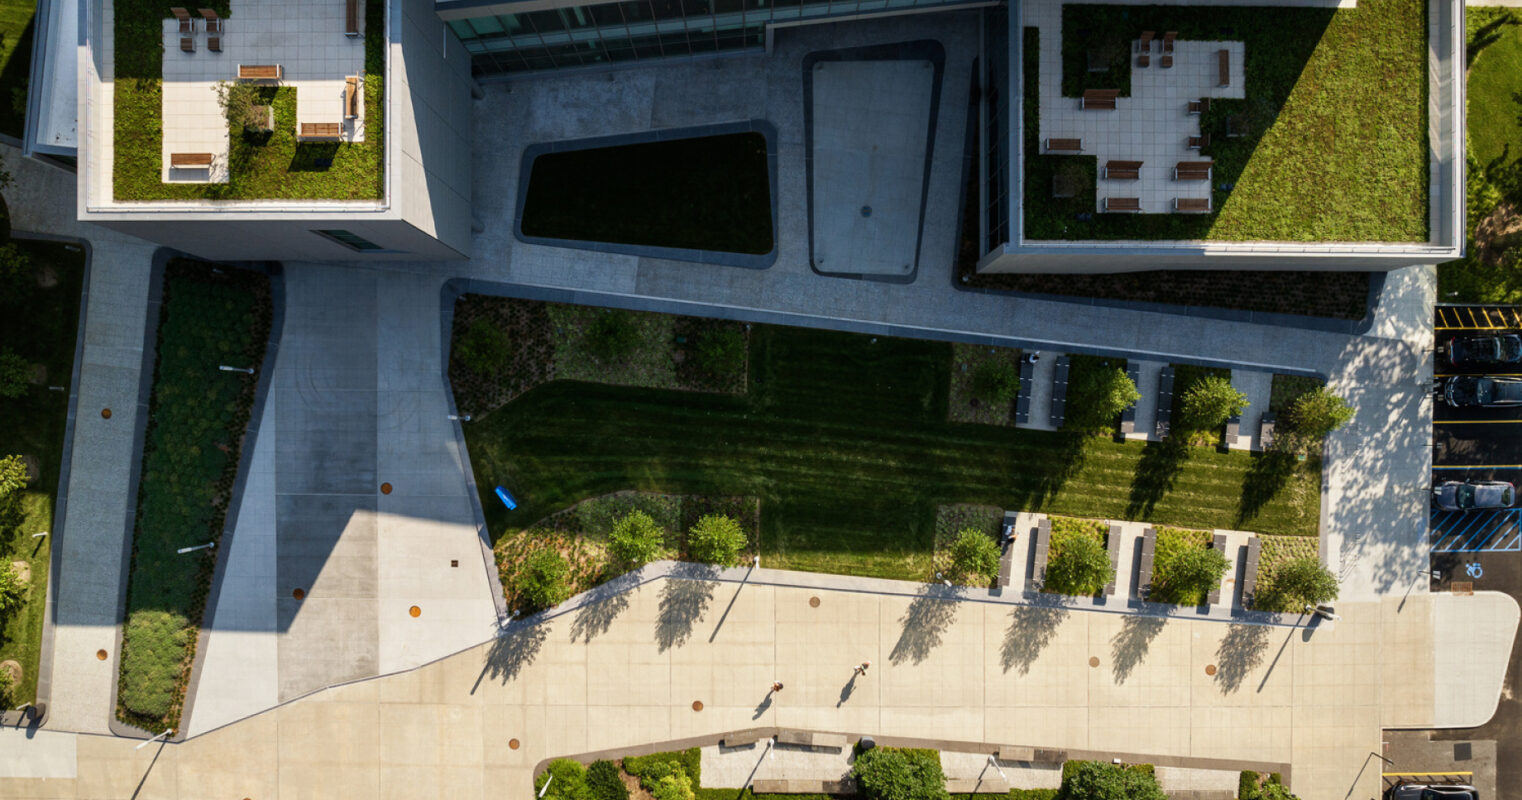 A bird's-eye view of a modern architectural complex with a neatly landscaped courtyard, shadow-casting walkways, and a blend of green spaces and geometric structures. A bird's-eye view of a modern architectural complex with a neatly landscaped courtyard, shadow-casting walkways, and a blend of green spaces and geometric structures. le